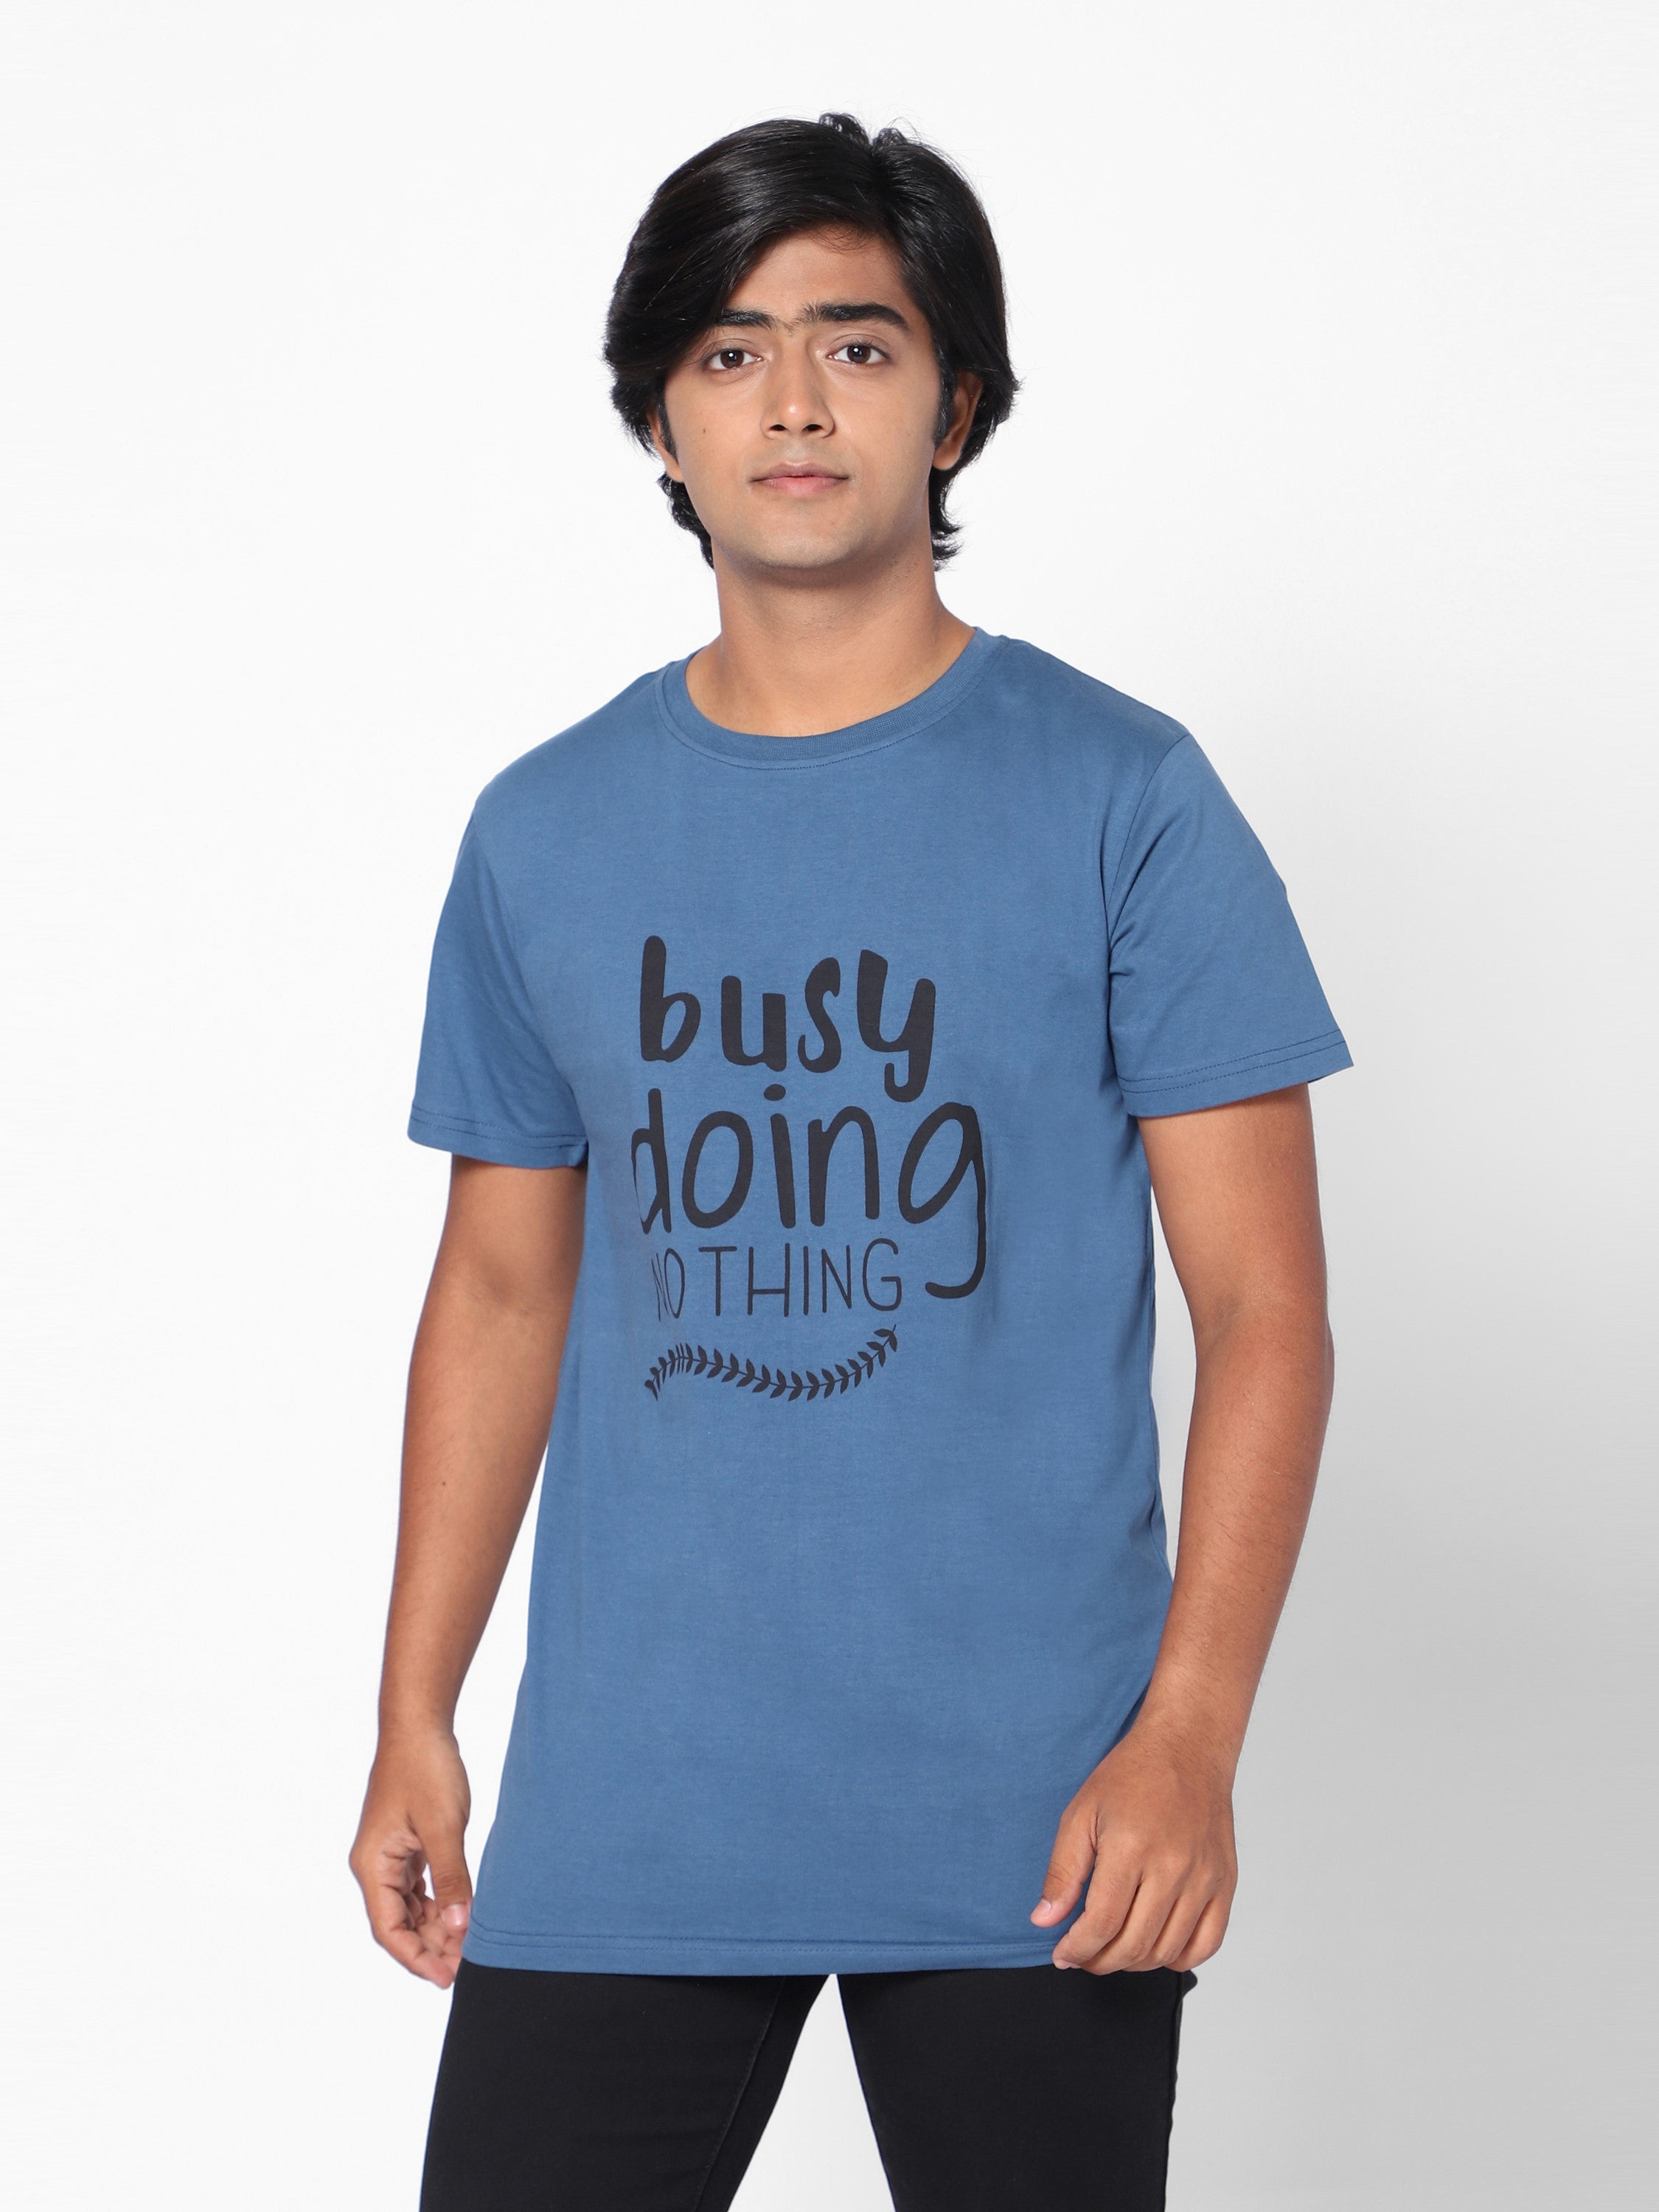 Boys Graphic Tshirt-Busy Doing Nothing-Diesel Blue